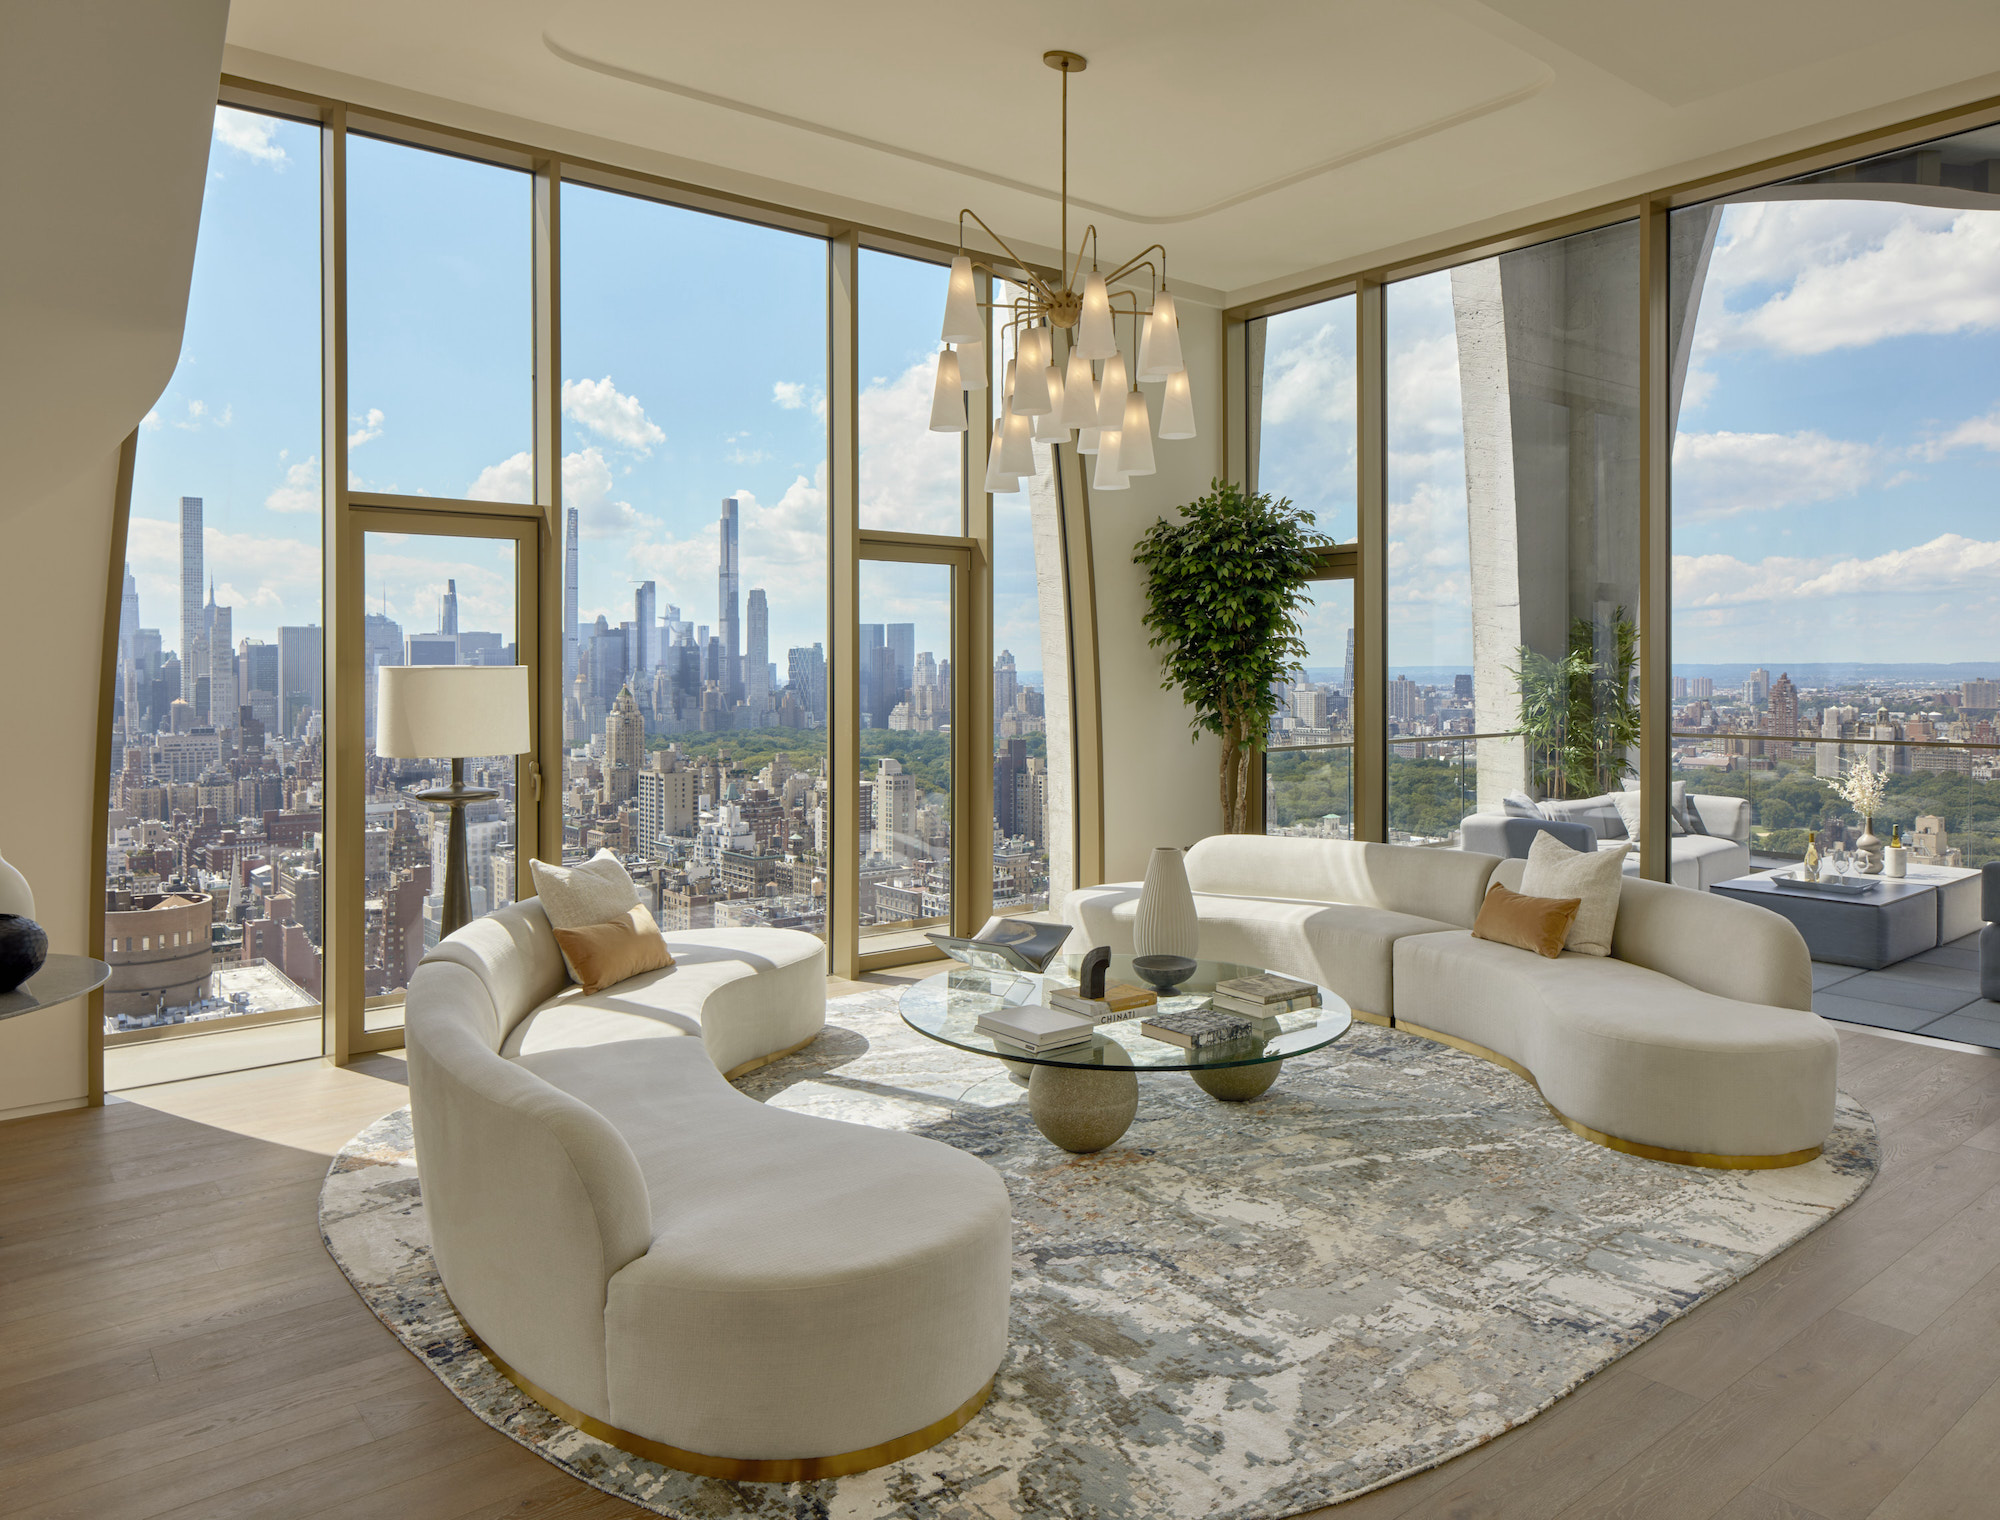 Asking $33M, the tallest penthouse on the UES has dramatic